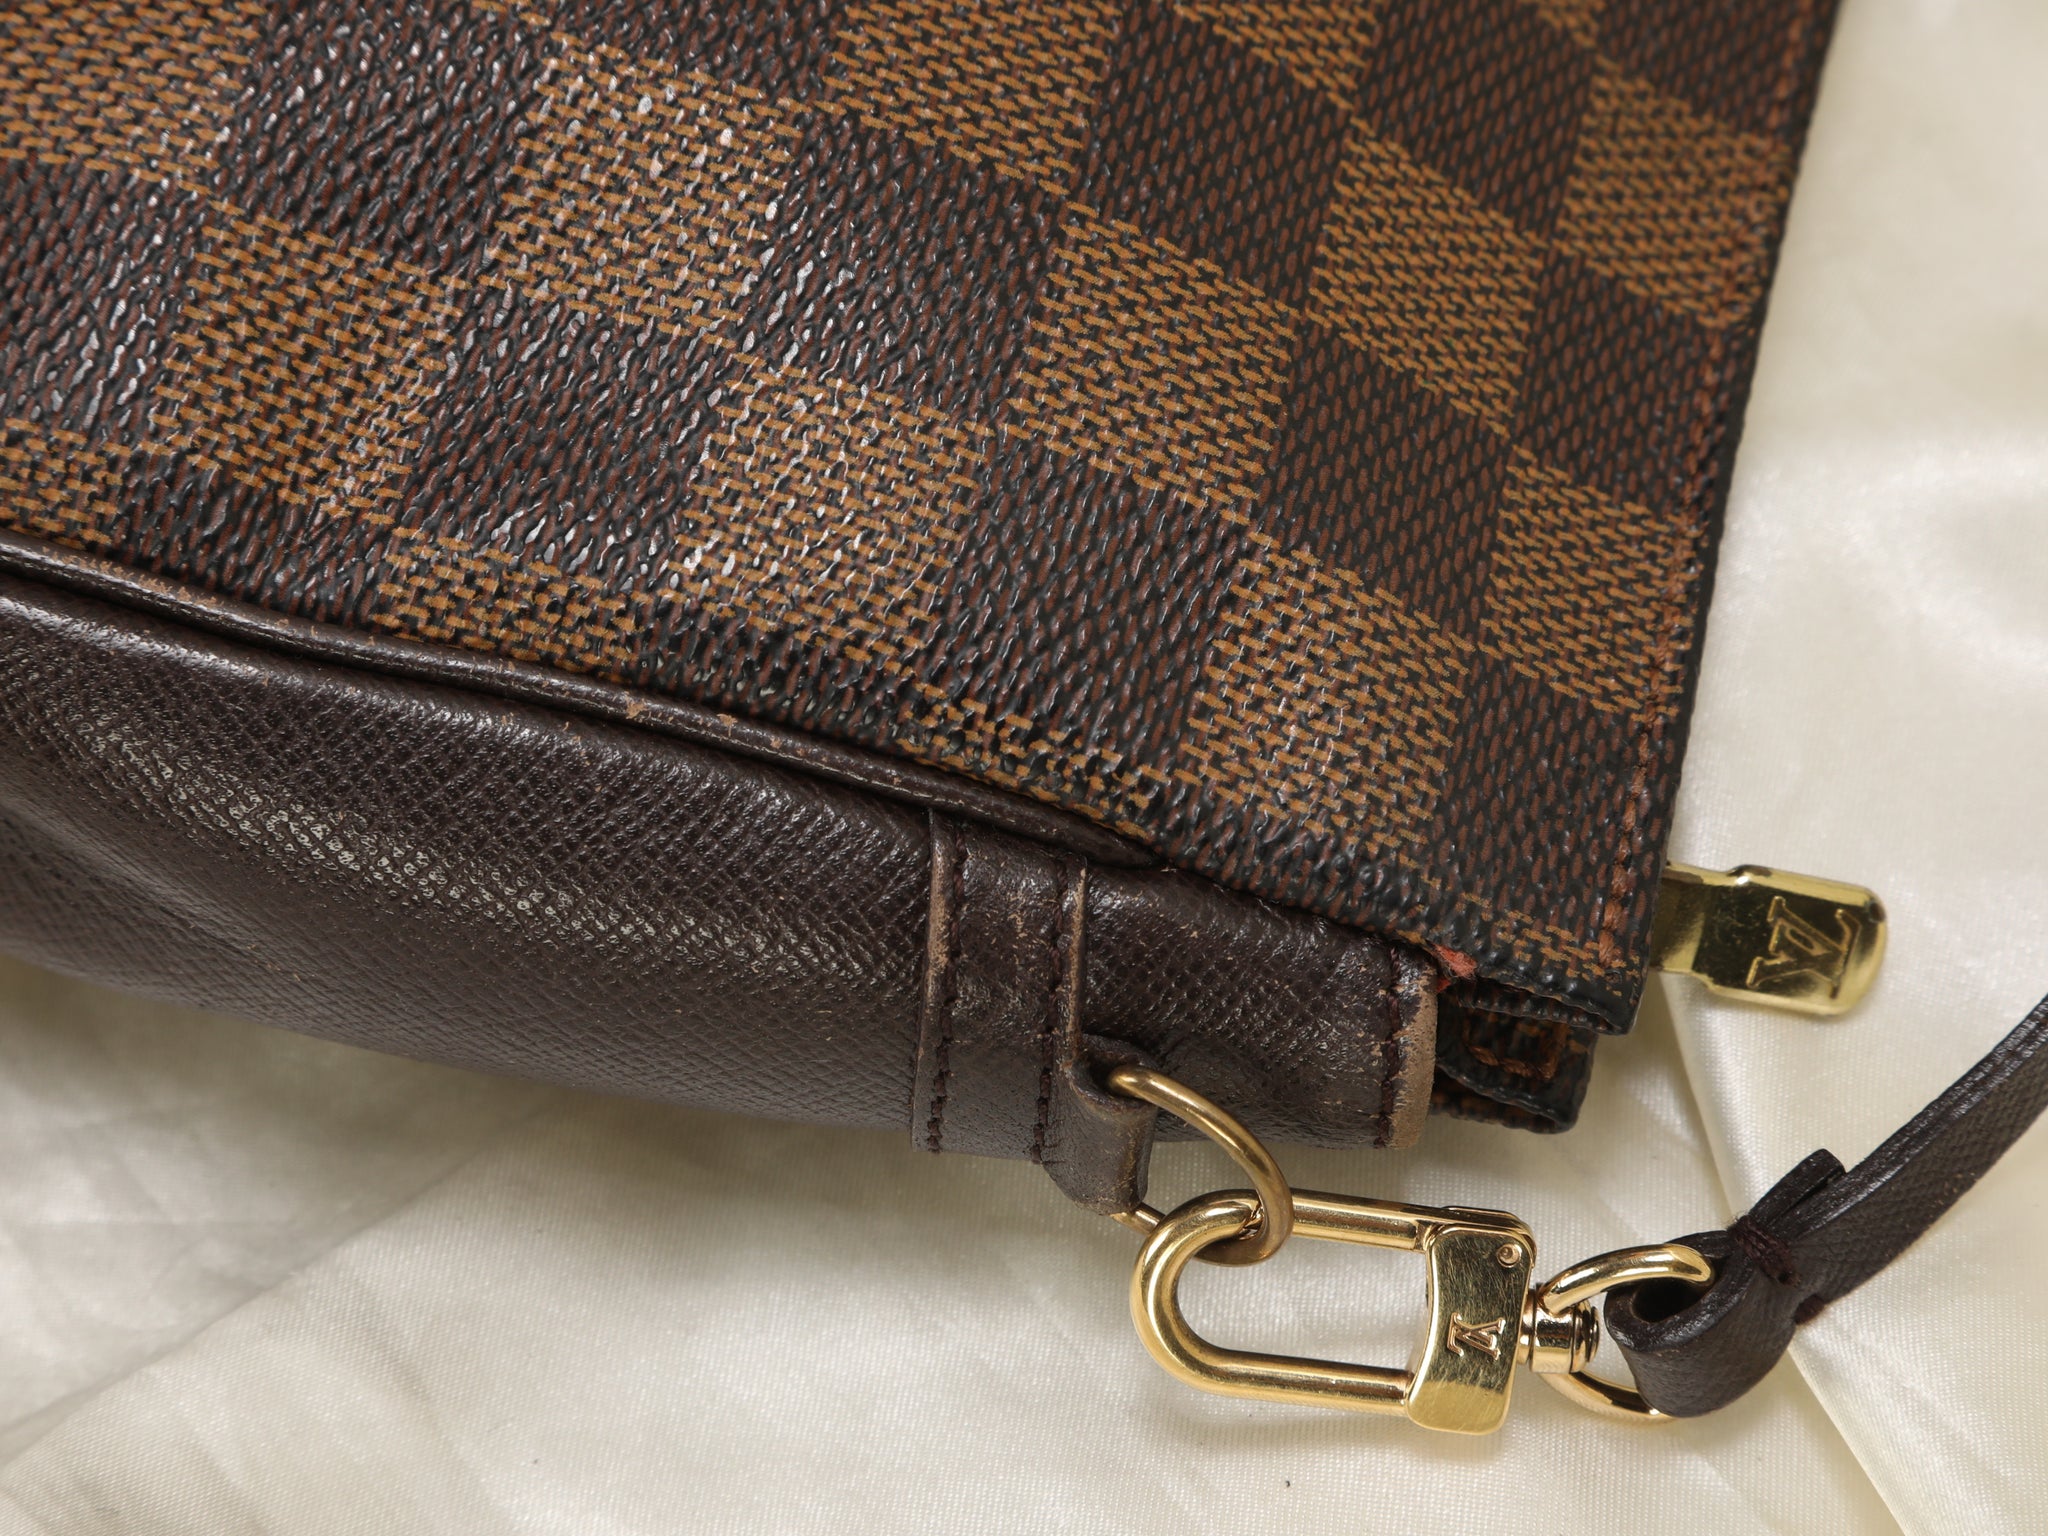 Félicie Pochette Damier Ebene Canvas - Wallets and Small Leather Goods